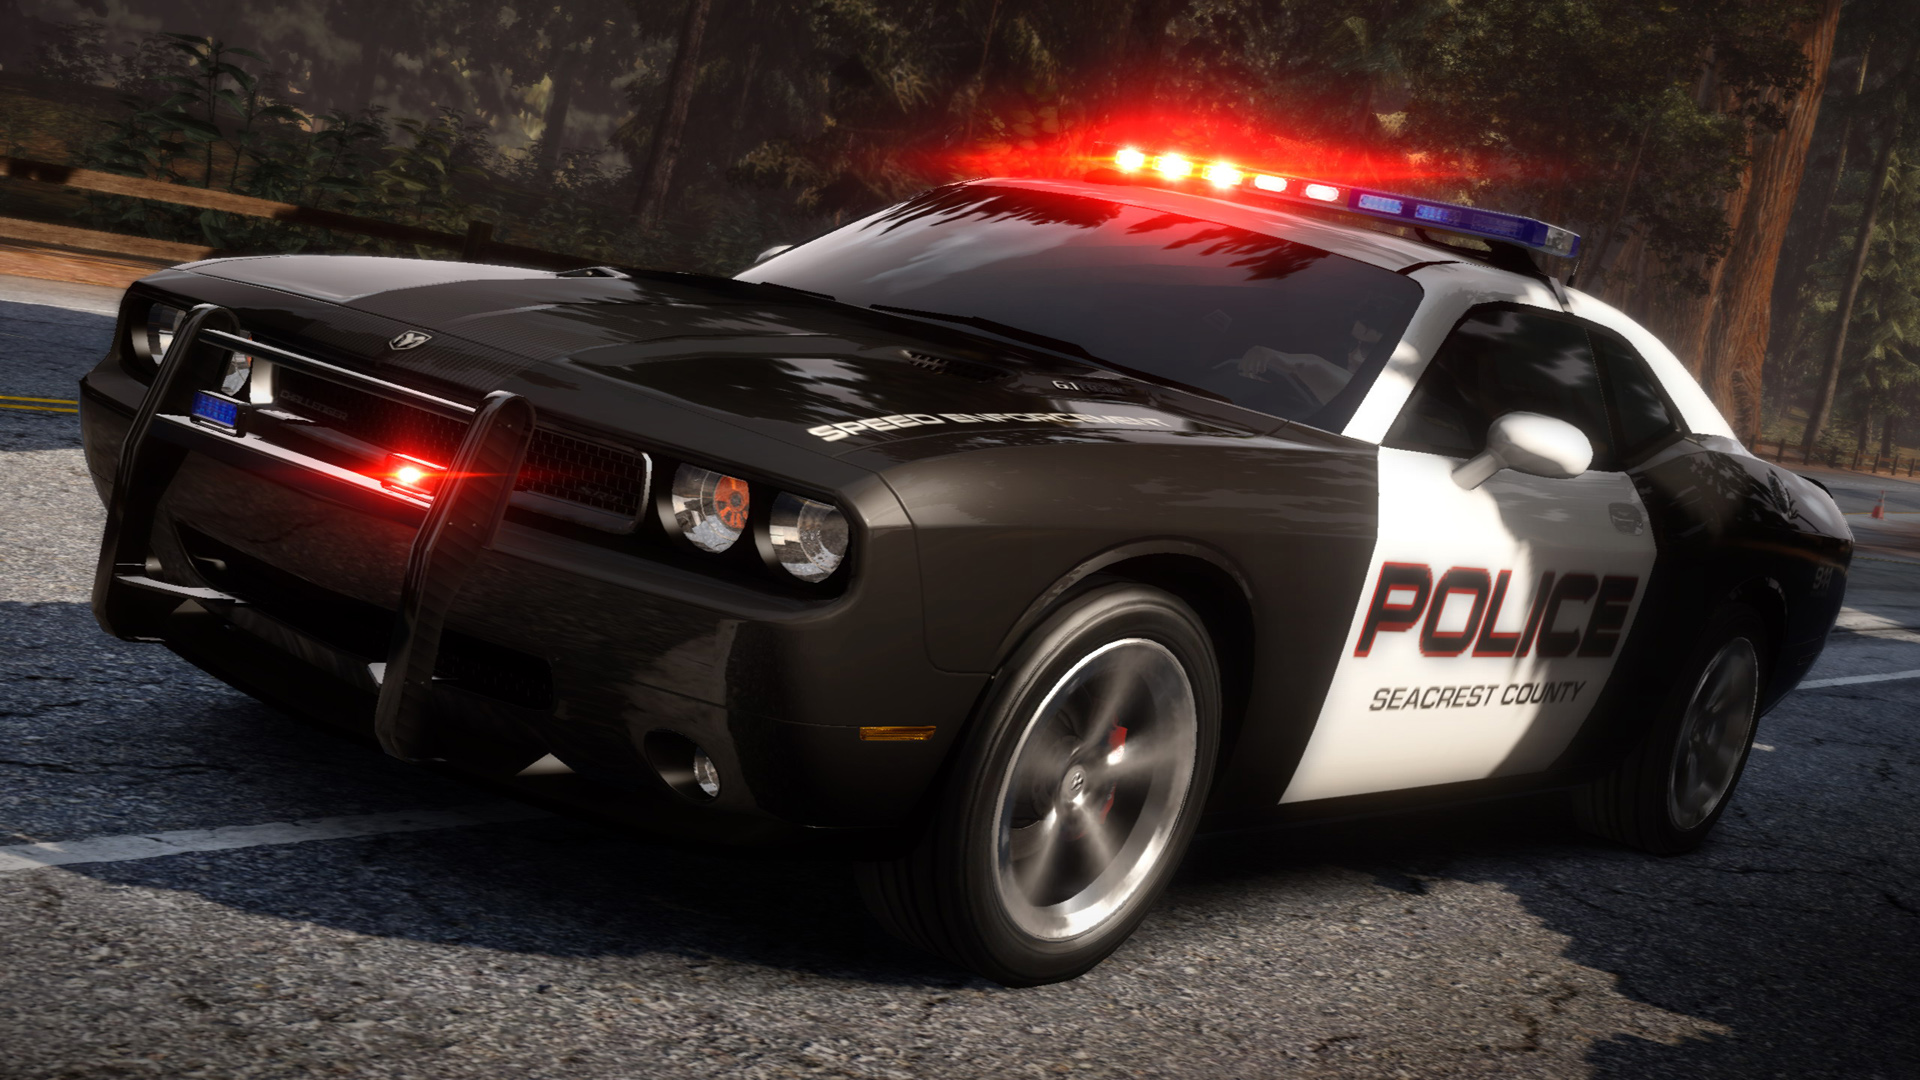 video game, need for speed: hot pursuit, need for speed